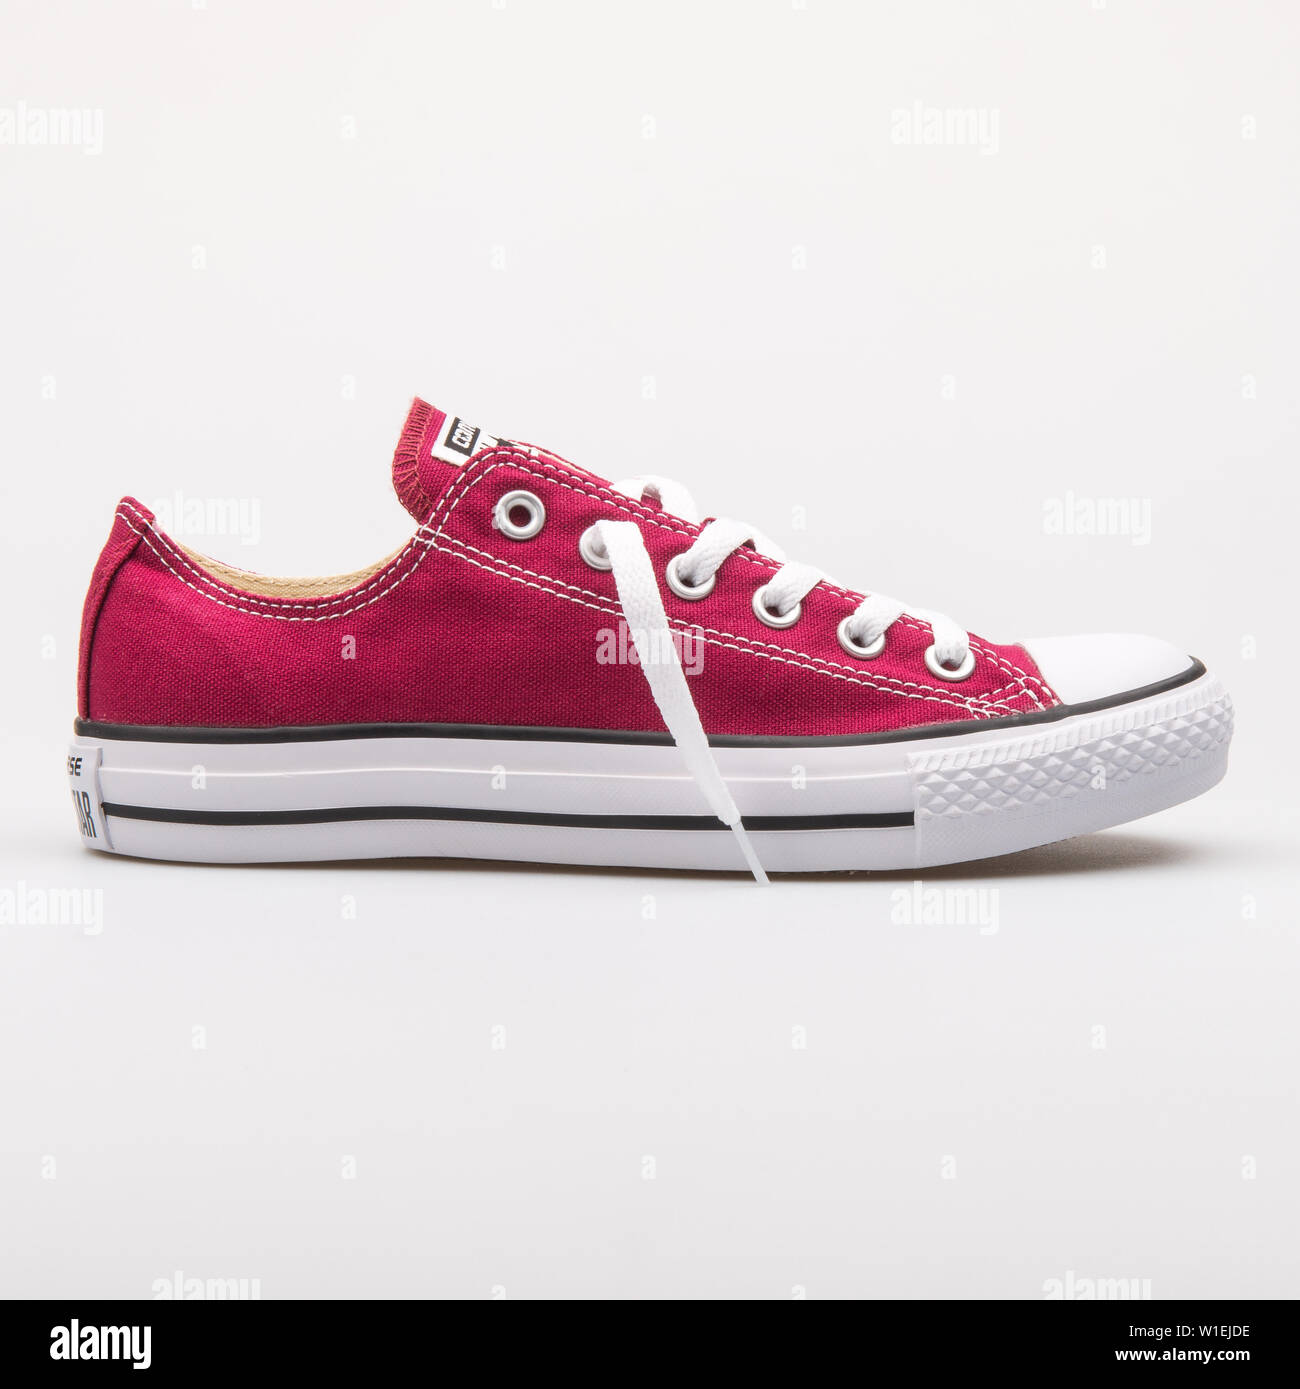 Maroon Converse High Resolution Stock Photography and Images - Alamy